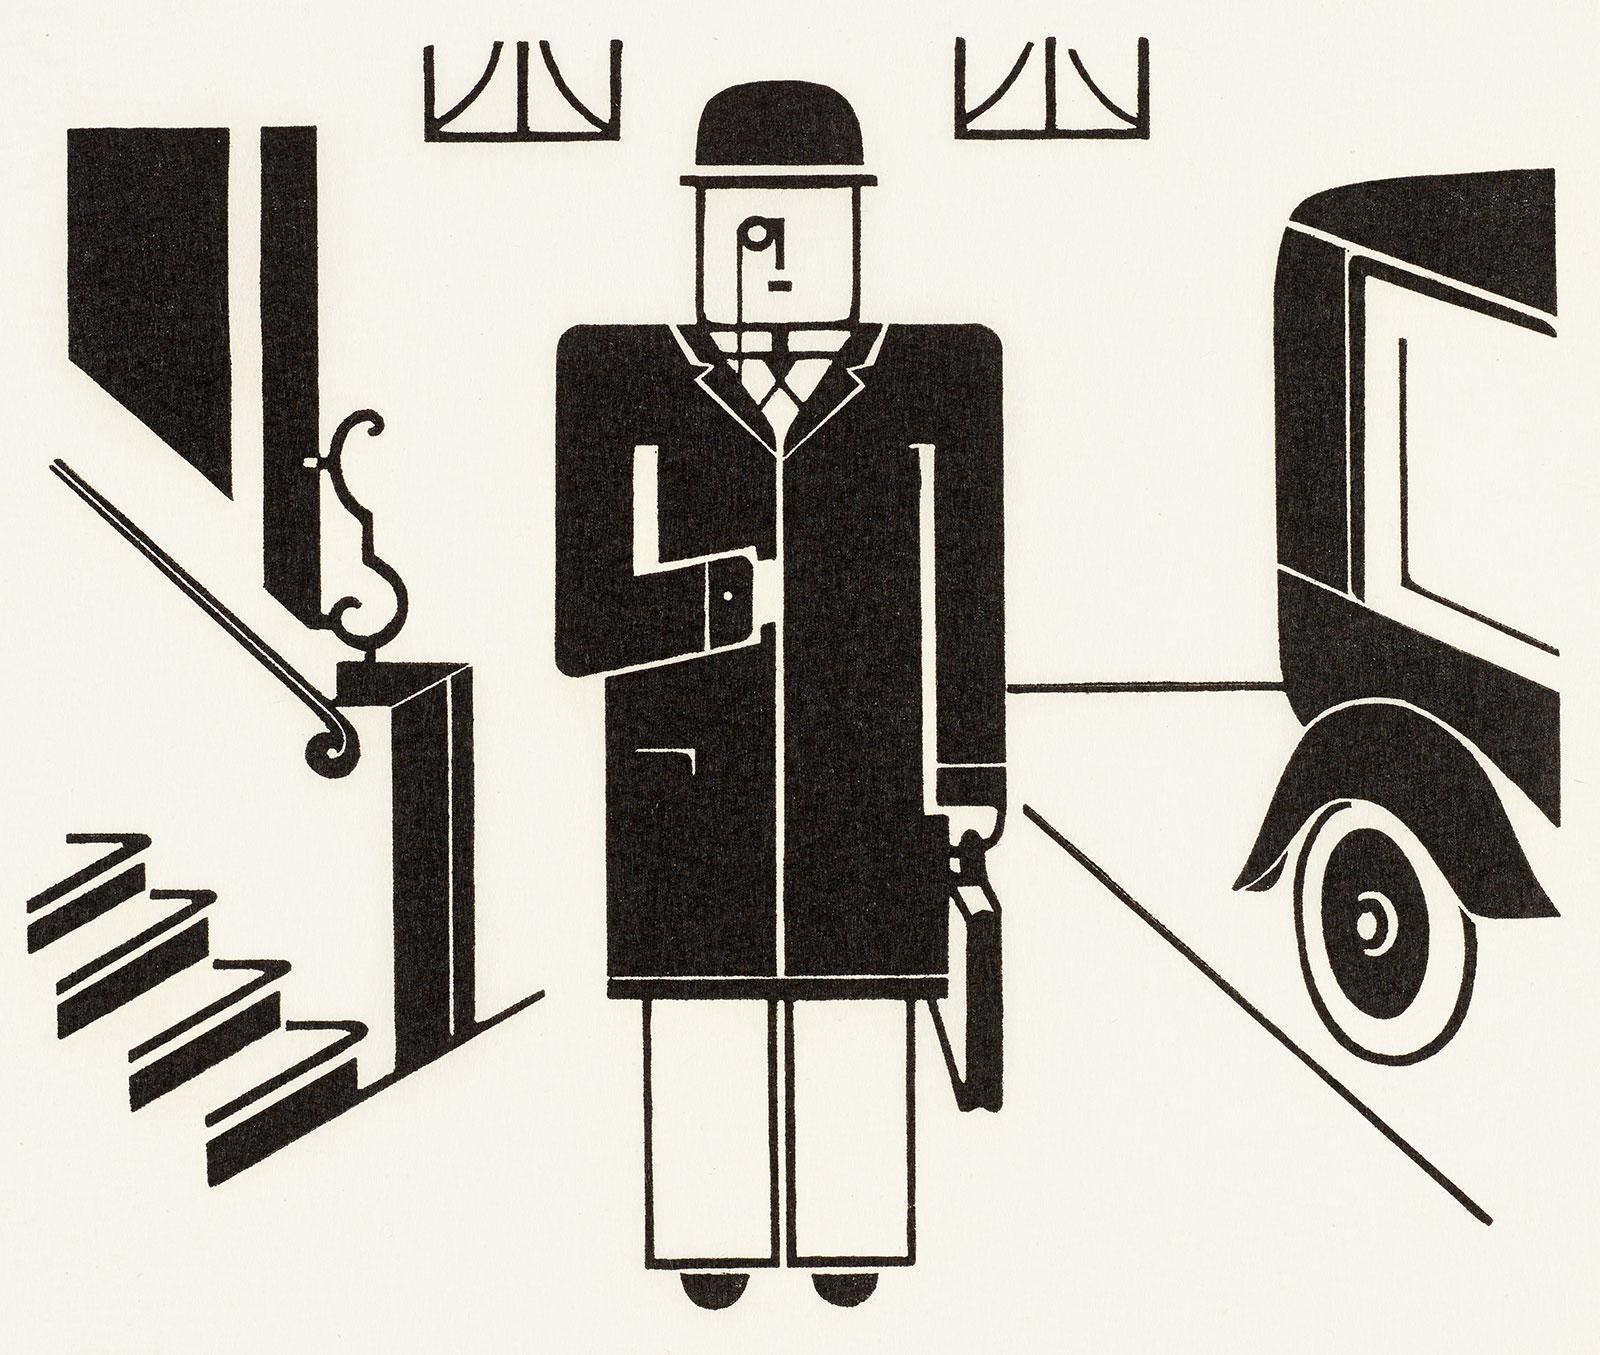 Print showing a businessman with monocle and briefcase